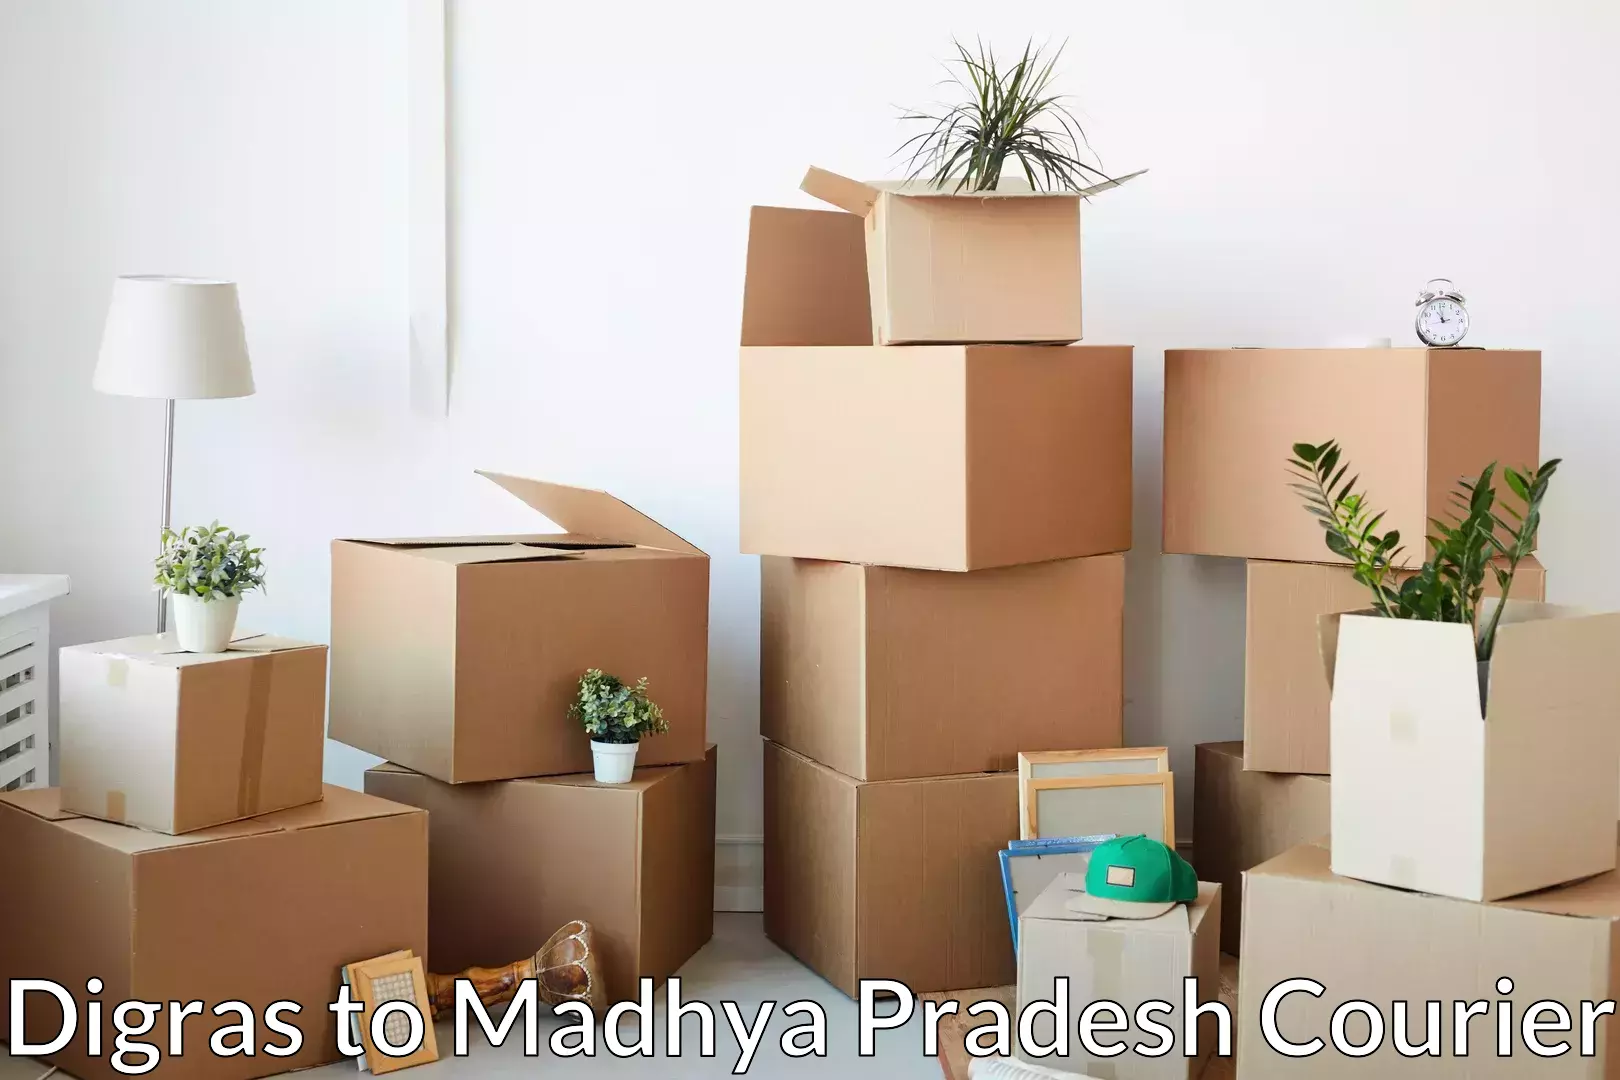 Professional moving company Digras to Khandwa